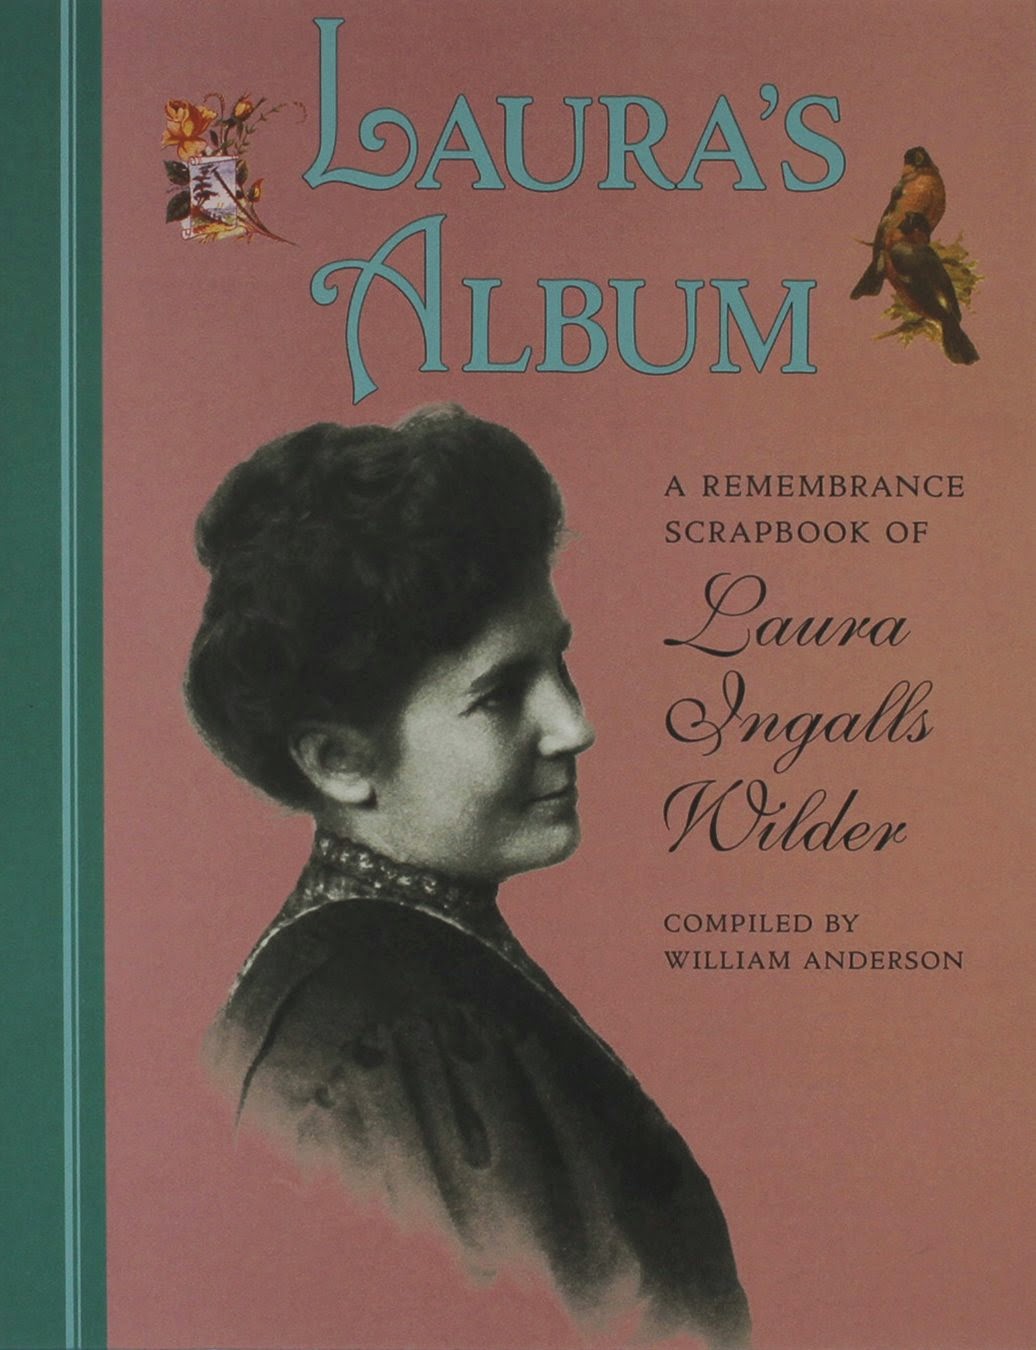 Laura's Album: A Remembrance Scrapbook of Laura Ingalls Wilder provides fans, both young and old, with photographs, writings, and additional memorabilia from Laura's life.